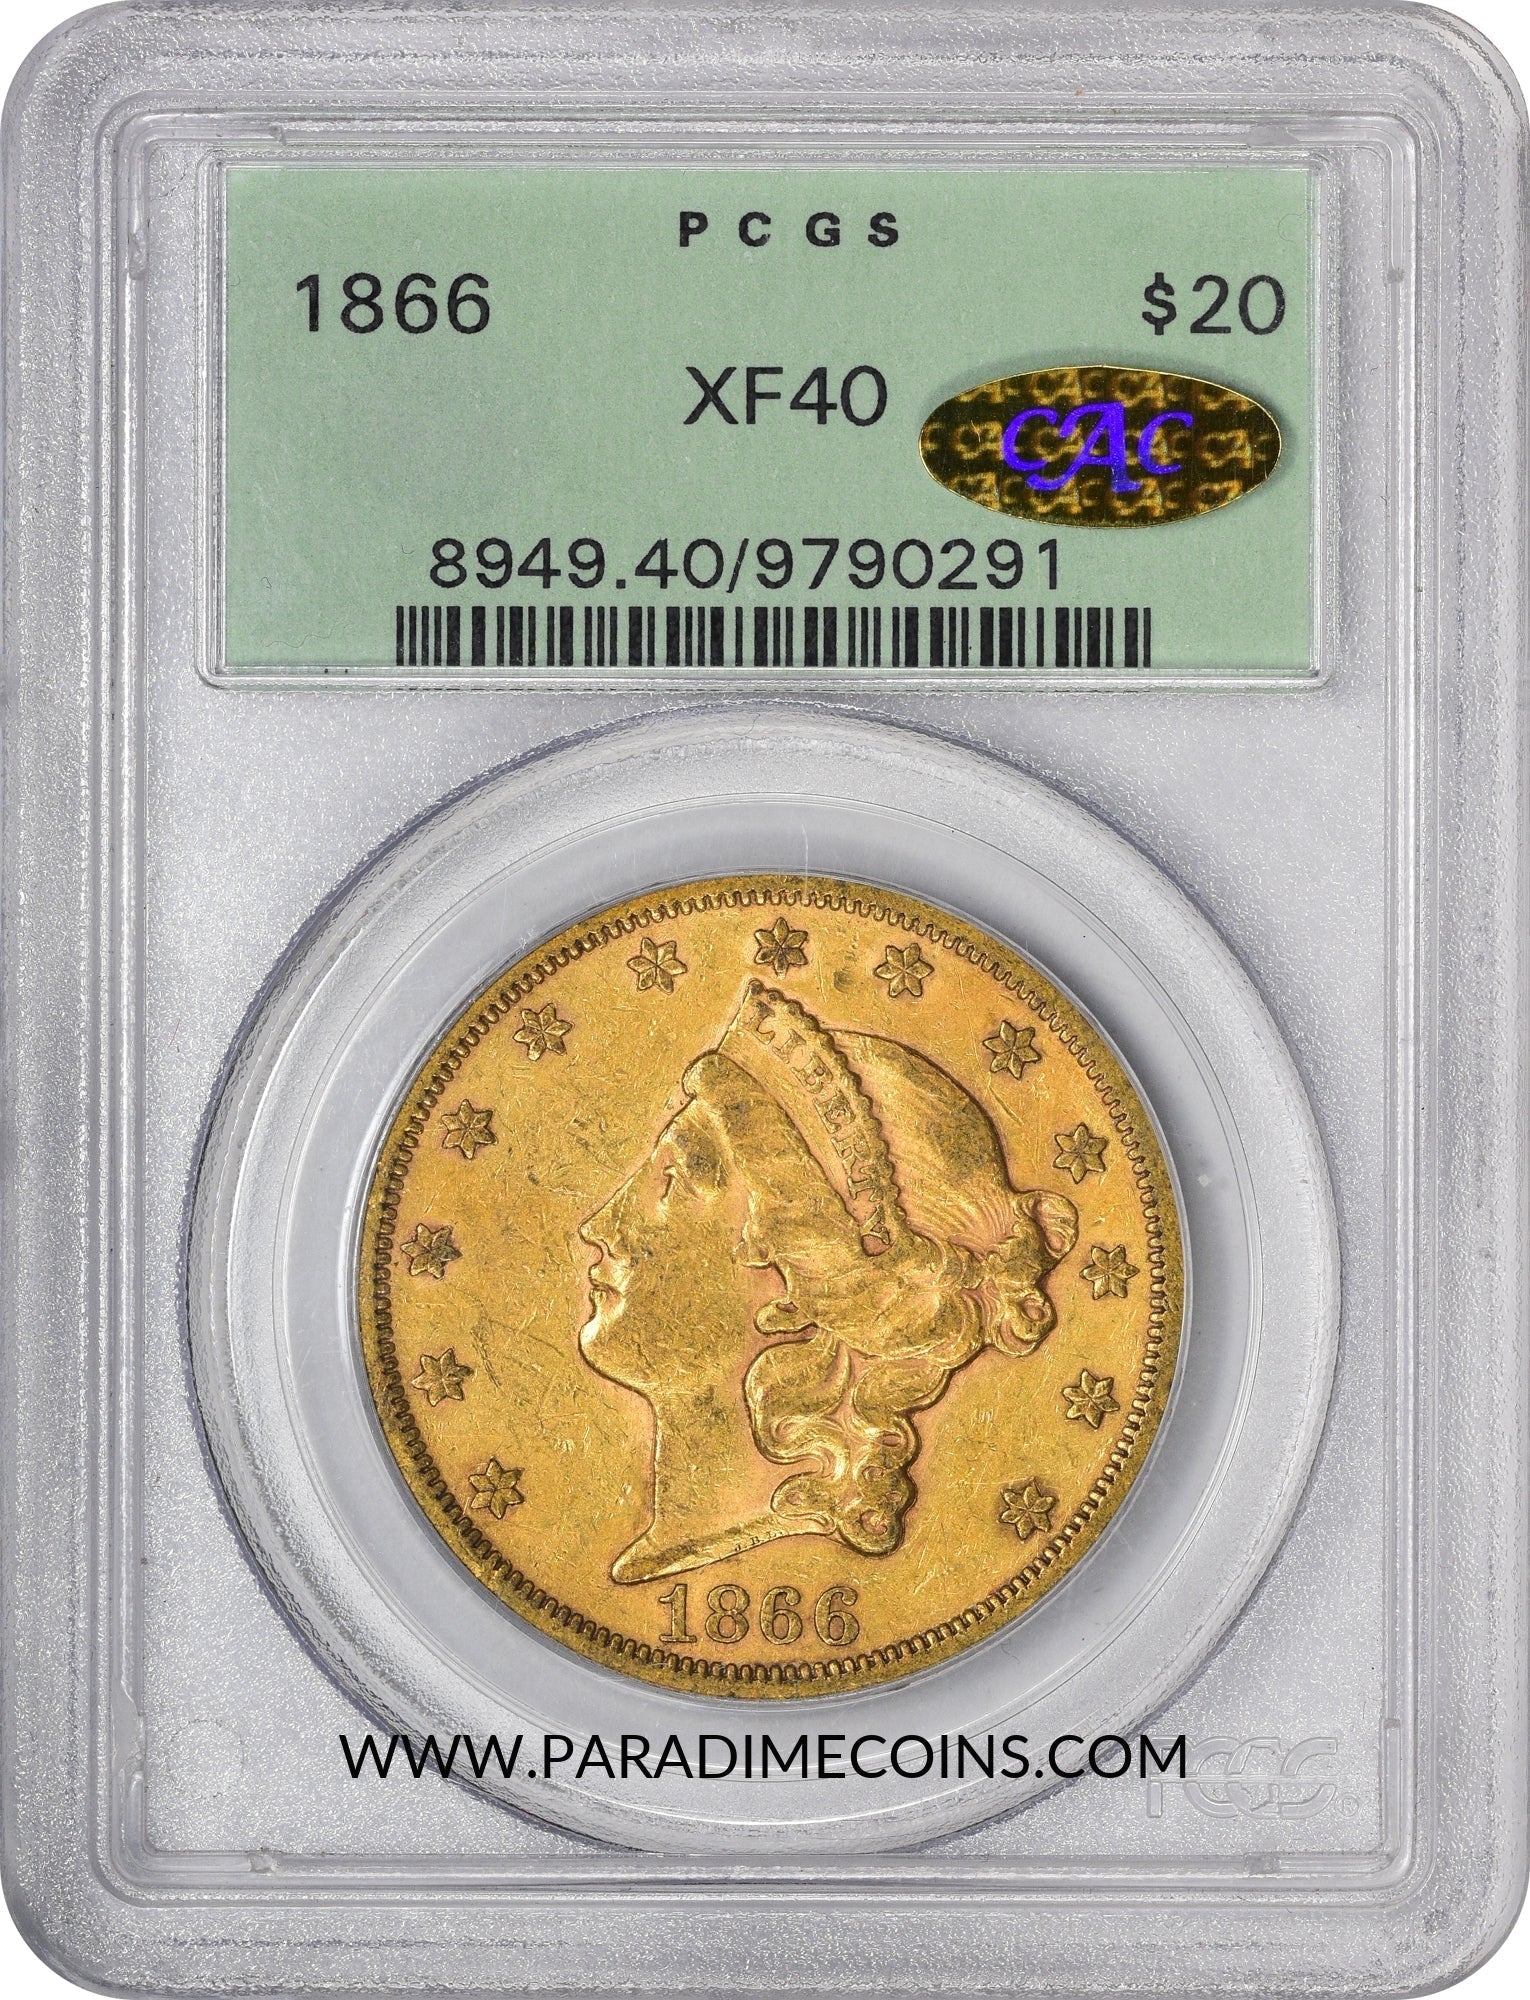 1866 $20 MOTTO XF40 OGH PCGS GOLD CAC - Paradime Coins | PCGS NGC CACG CAC Rare US Numismatic Coins For Sale